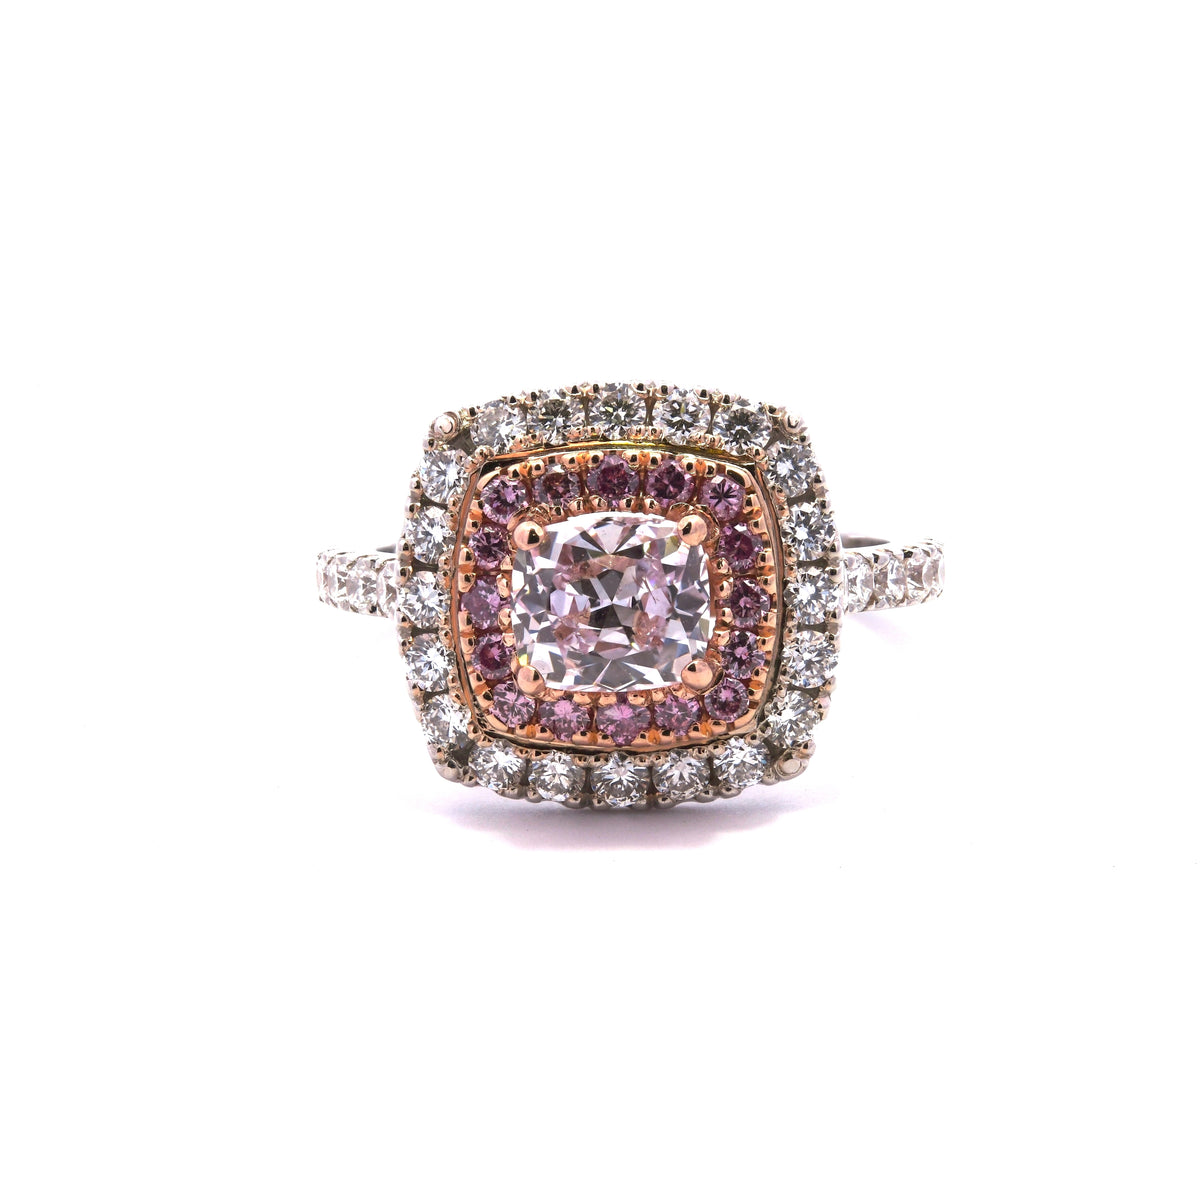 Fancy Halo Ring Round and Cushion Shape Pink and Natural Diamonds 1.78 ct GIA Certified